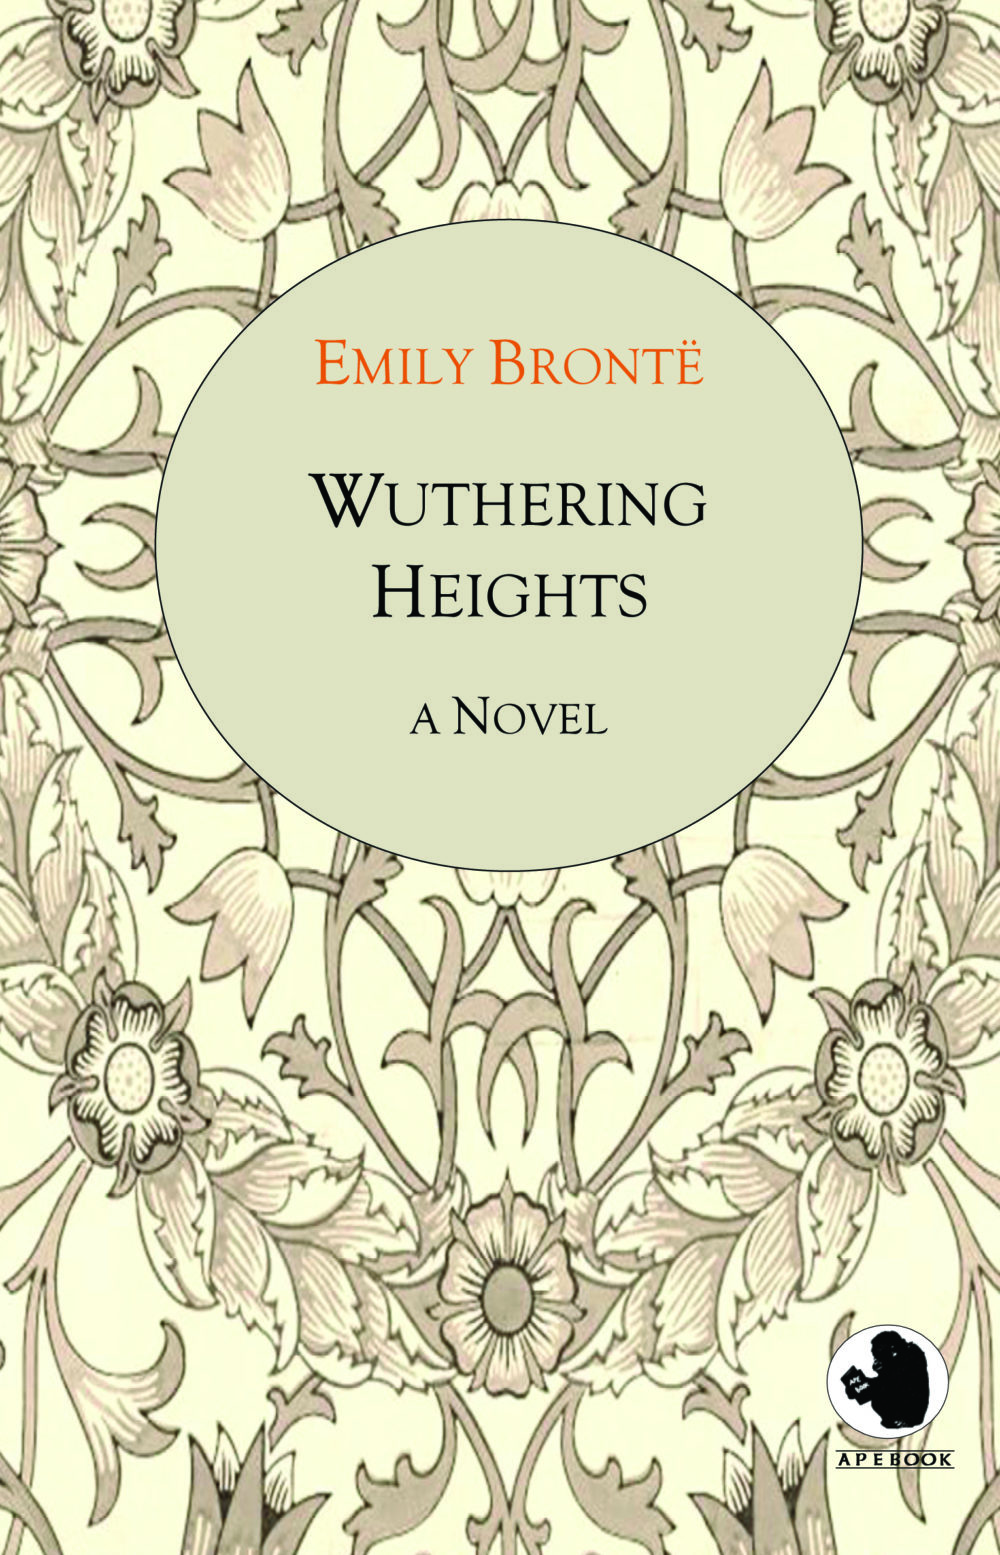 Emily Bronte: Wuthering Heights (engl.)